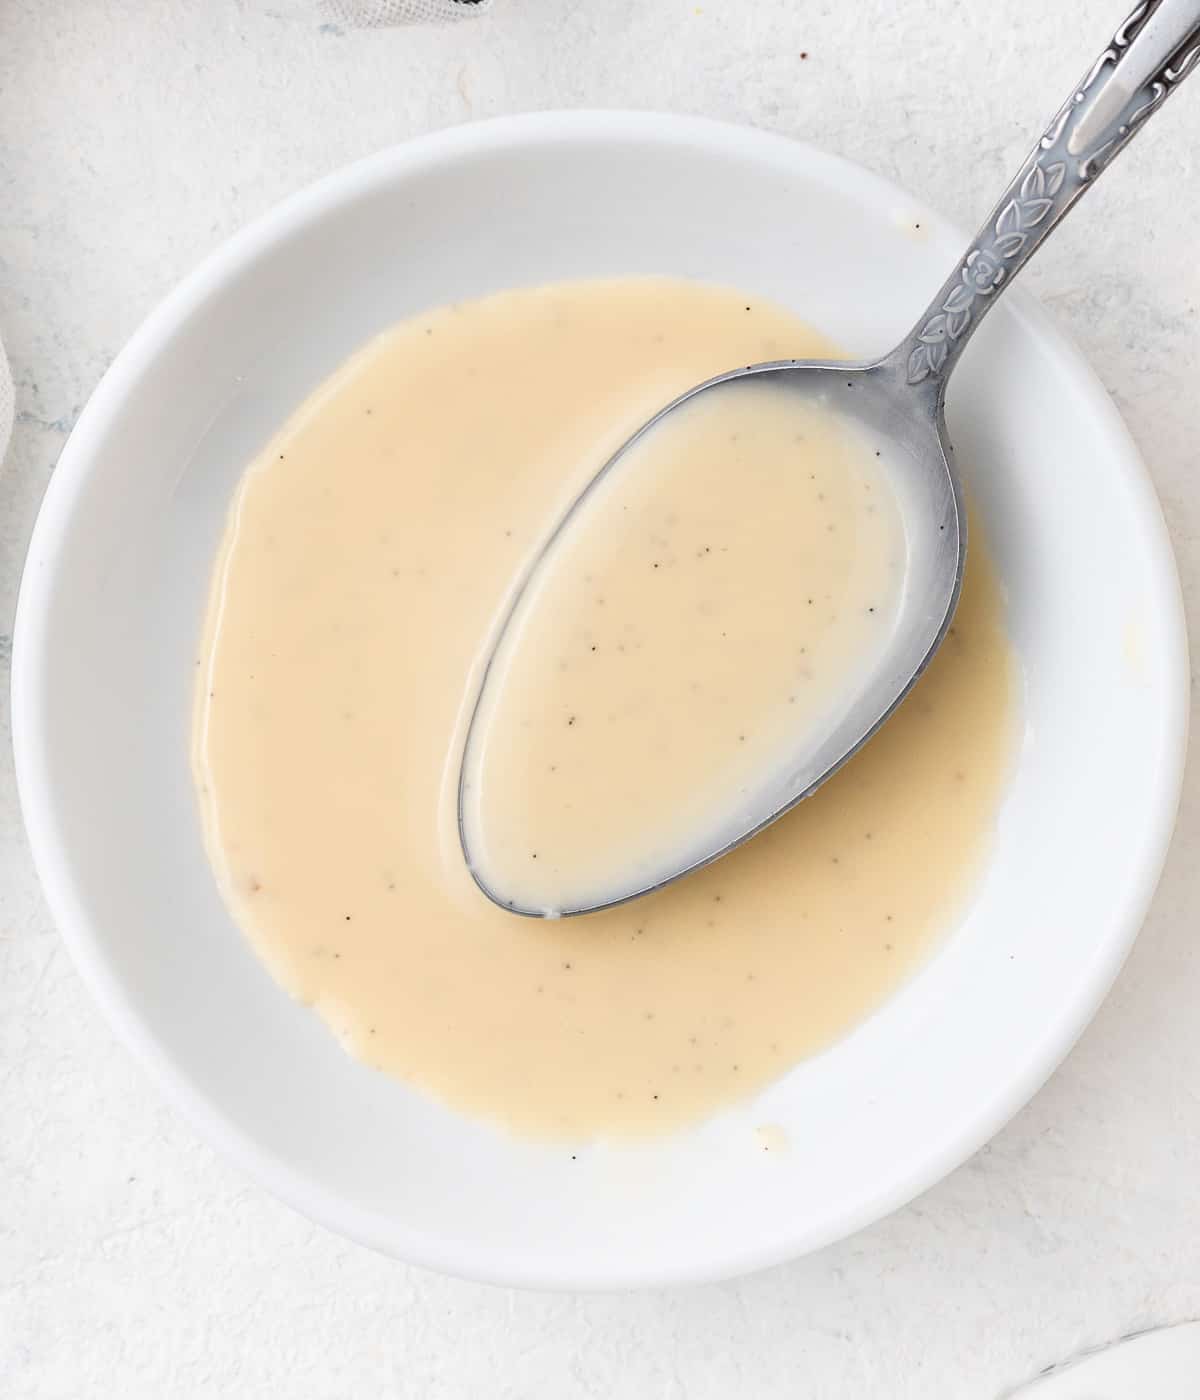 Cream in a small white bowl with a silver spoon.